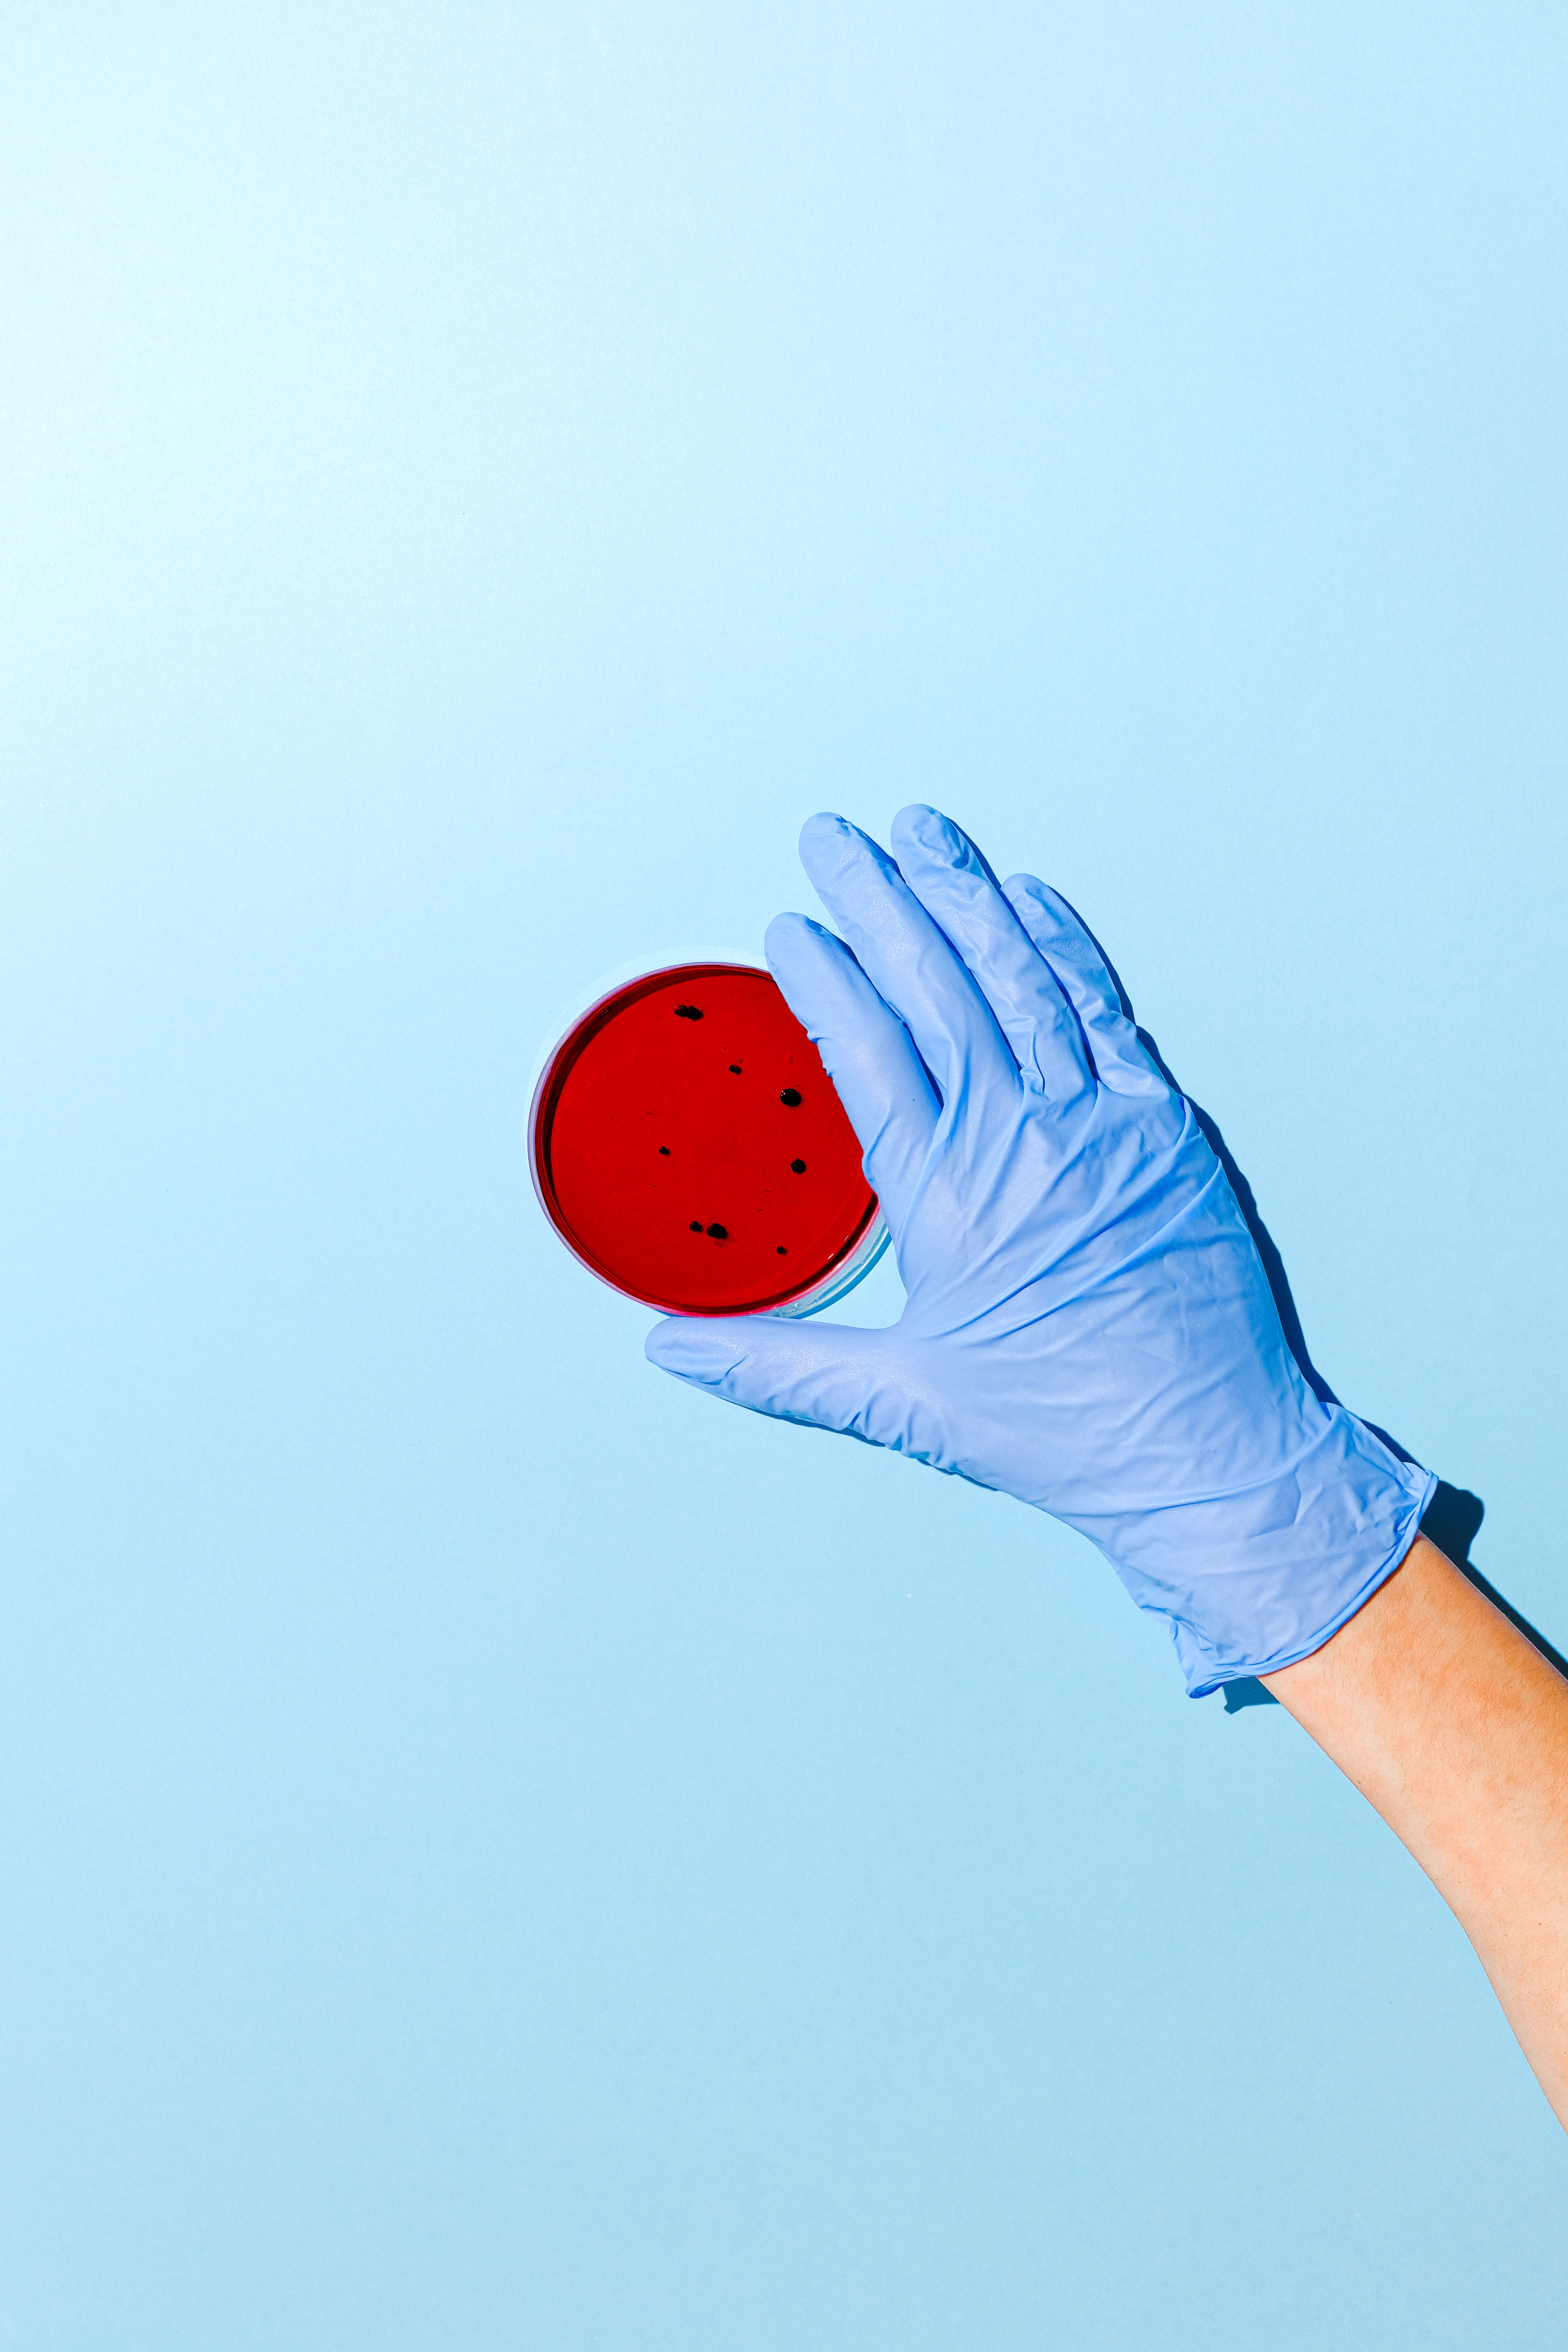 person-holding-red-petri-dish-3786210